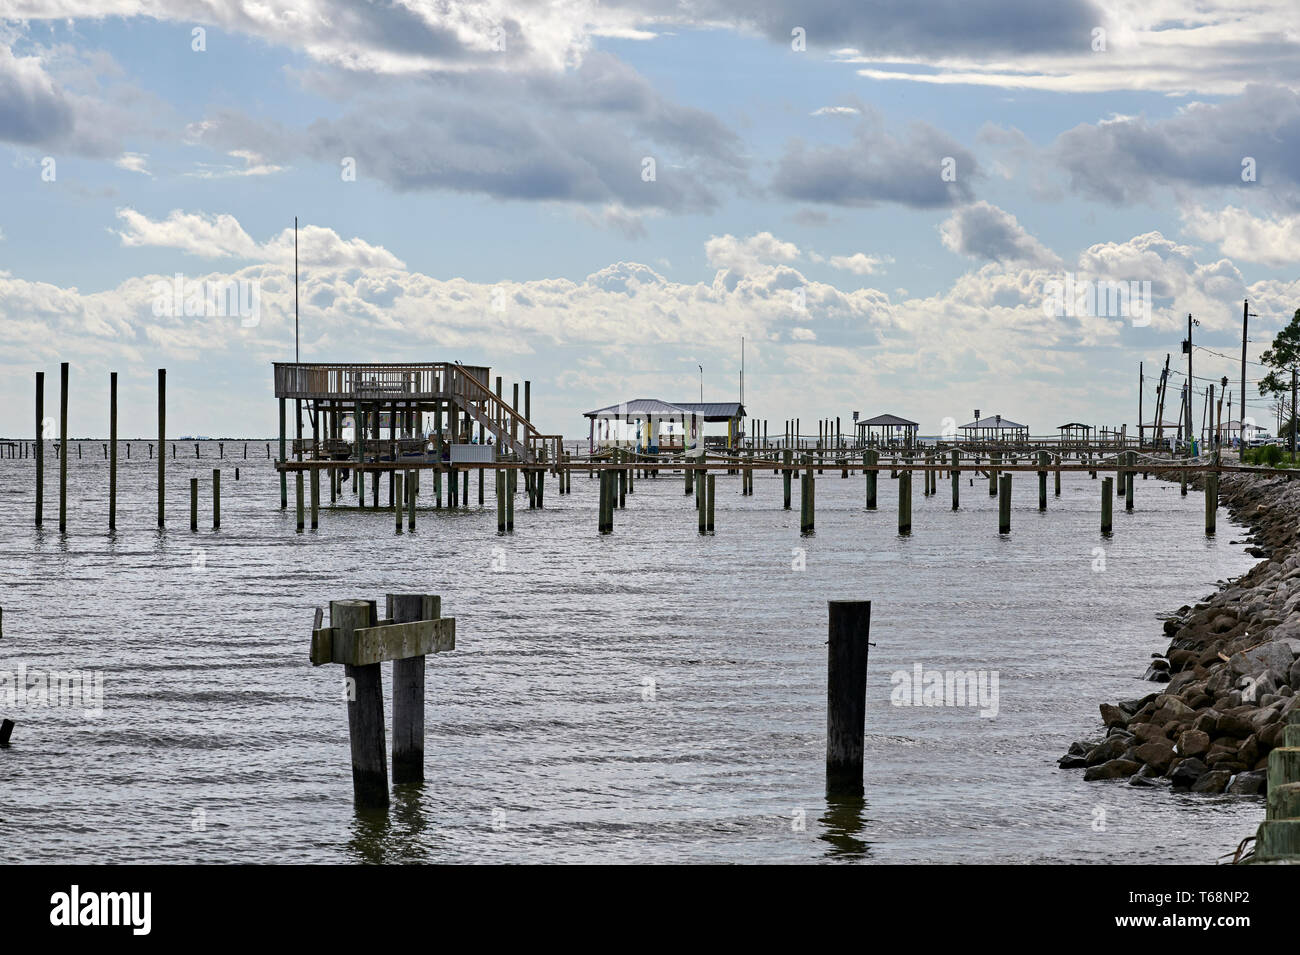 Wooden docks piers and pilings along the shore of Mobile Bay on the Gulf Coast, near Coden Alabama, USA. Stock Photo